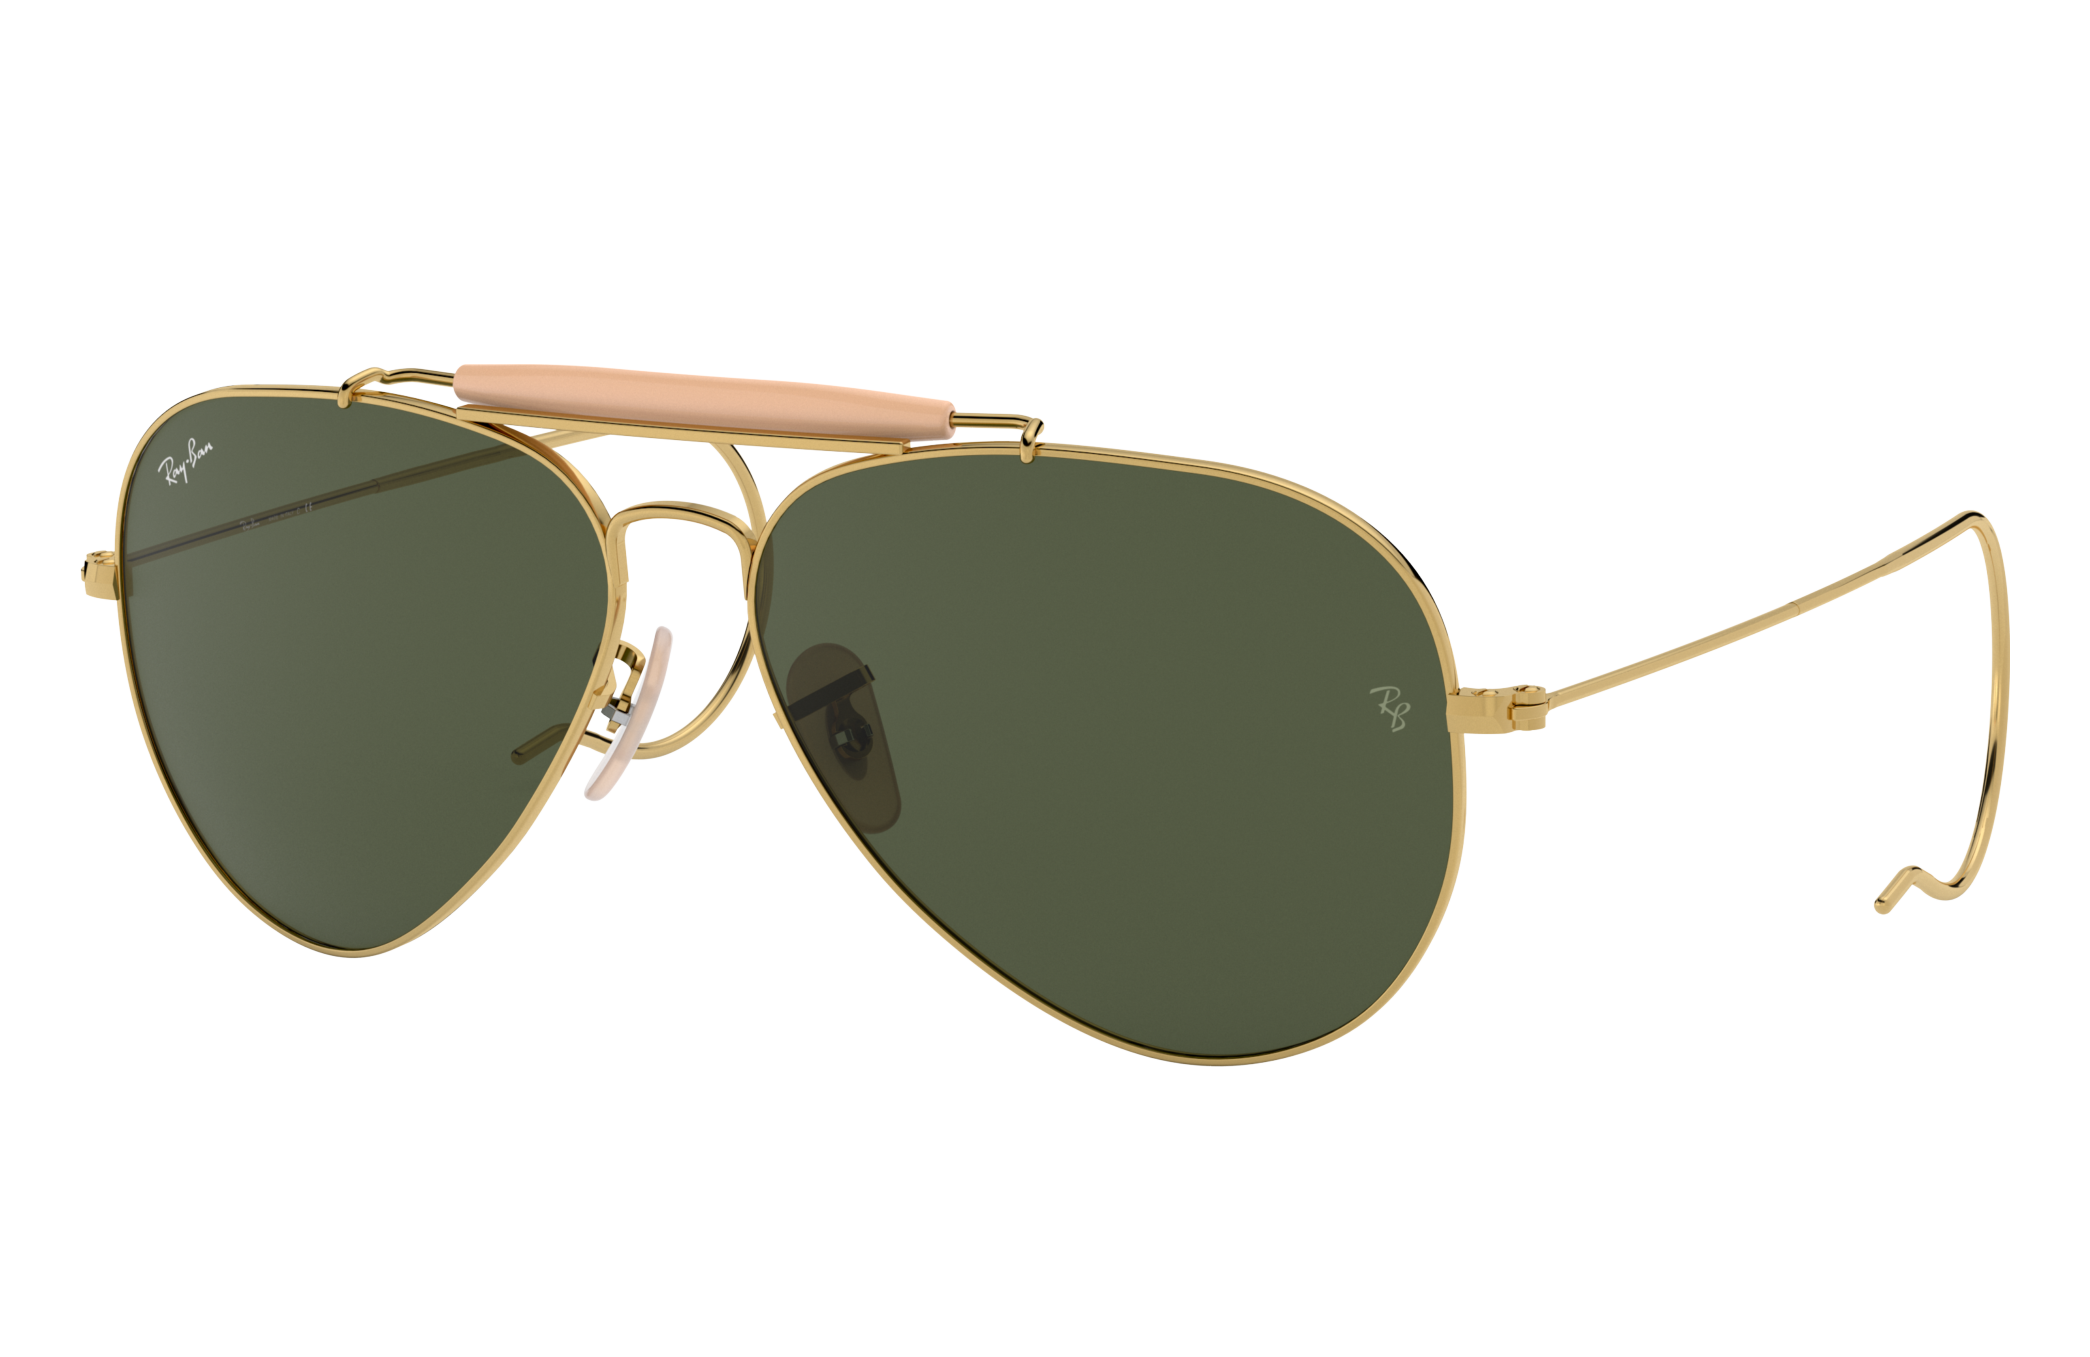 RB2180 Sunglasses in Black and Green - RB2180 | Ray-Ban® US